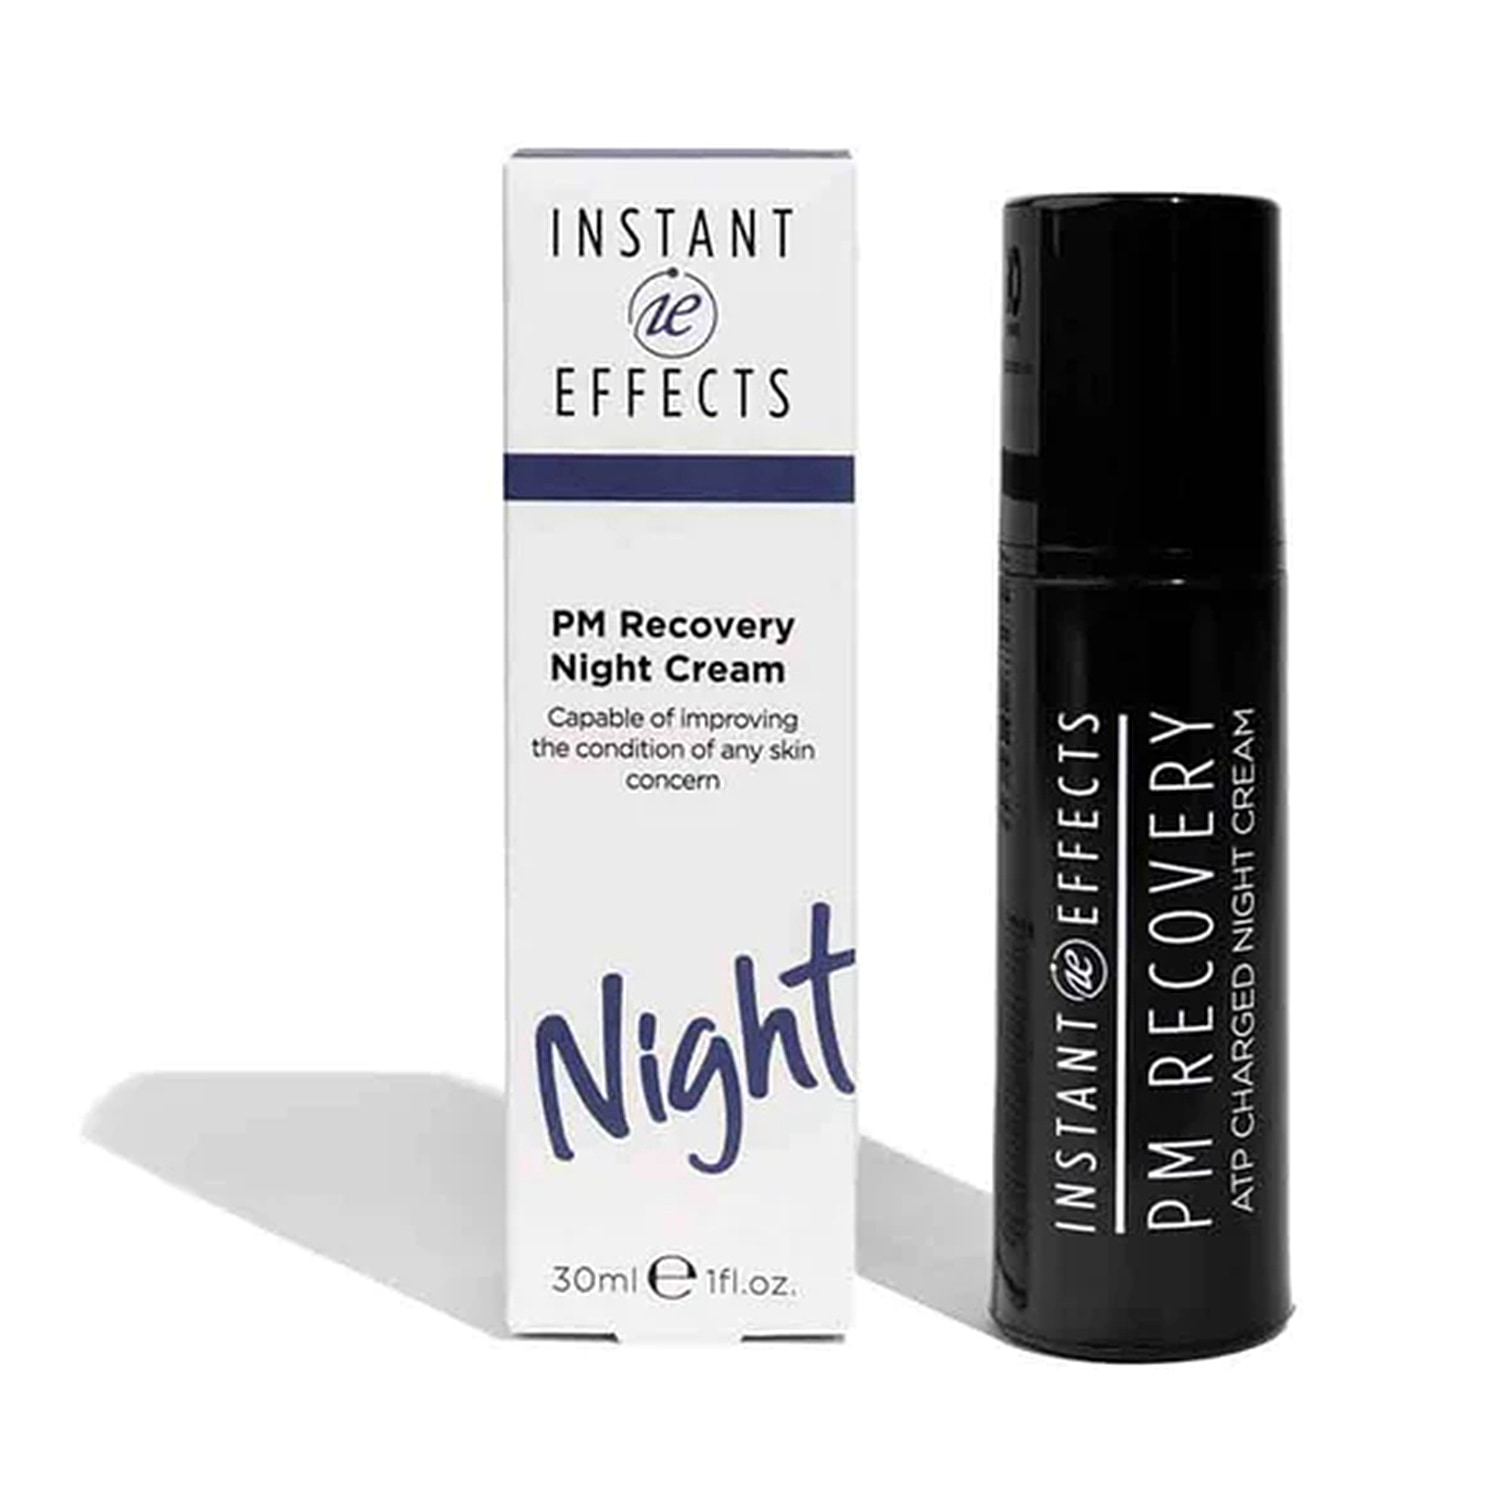 Instant Effects PM Recovery Night Cream - 30 ml